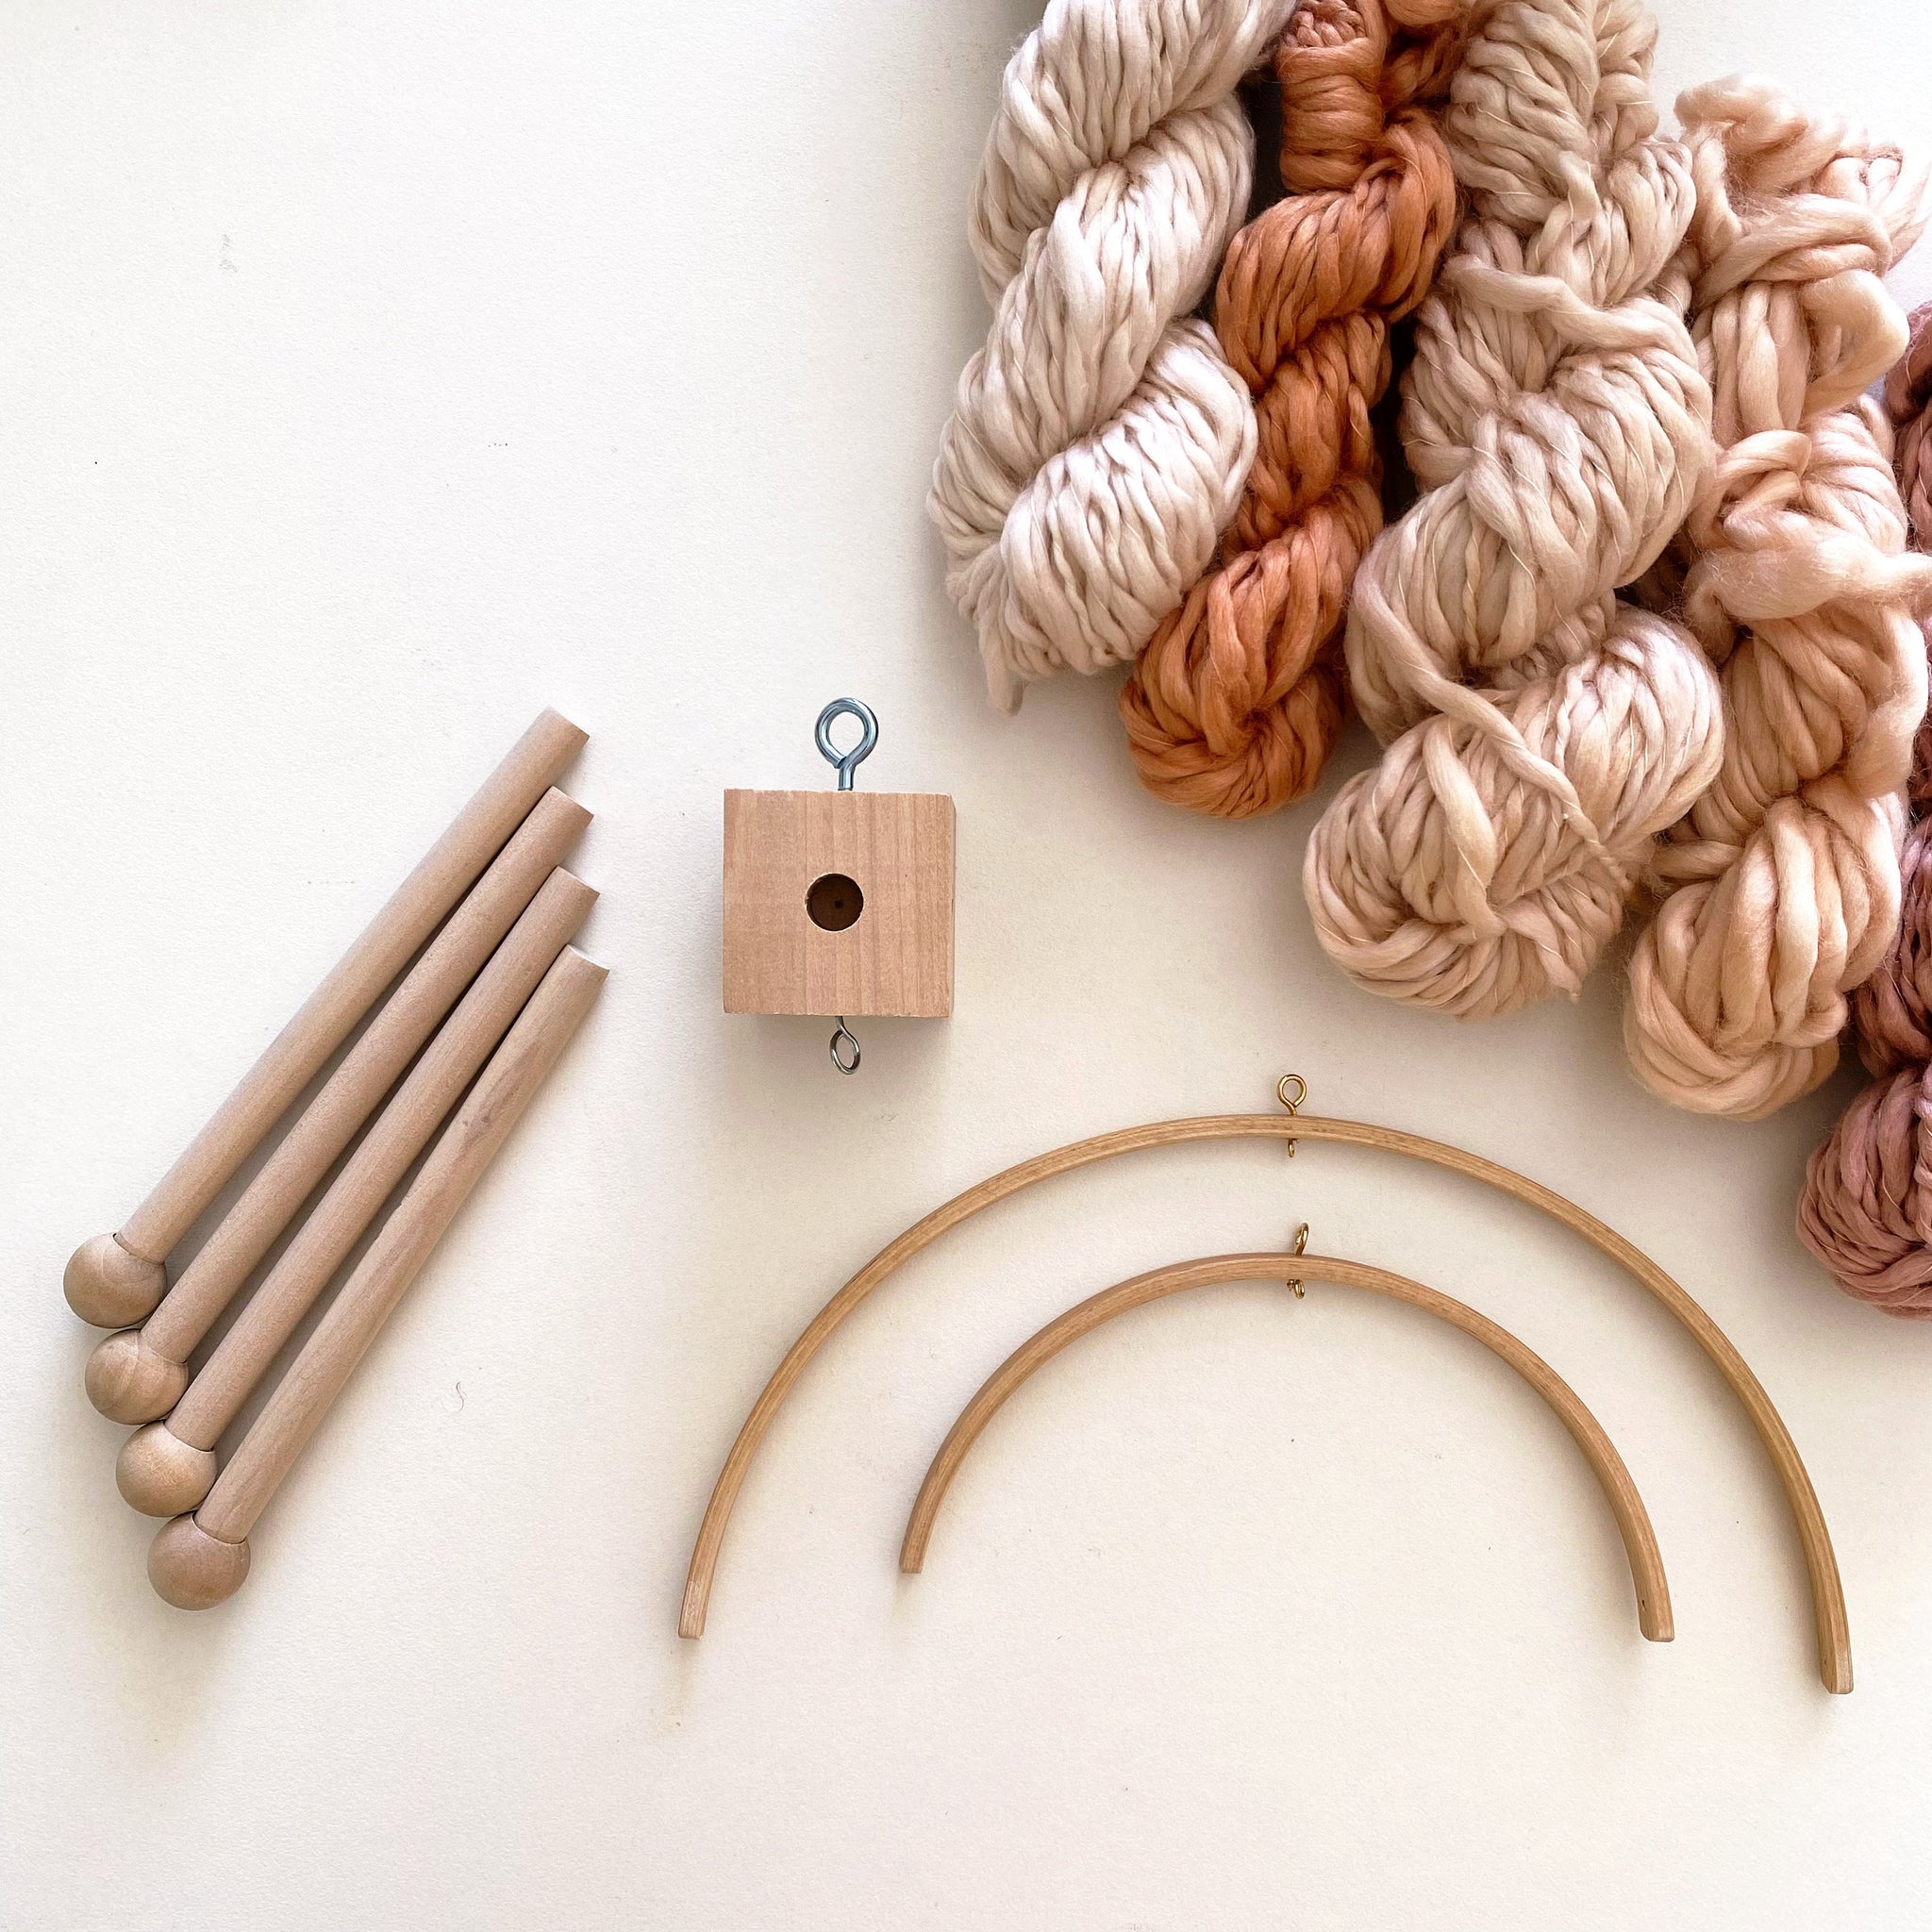 Wooden Rings - Mary Maker Studio - Macrame & Weaving Supplies and Education.